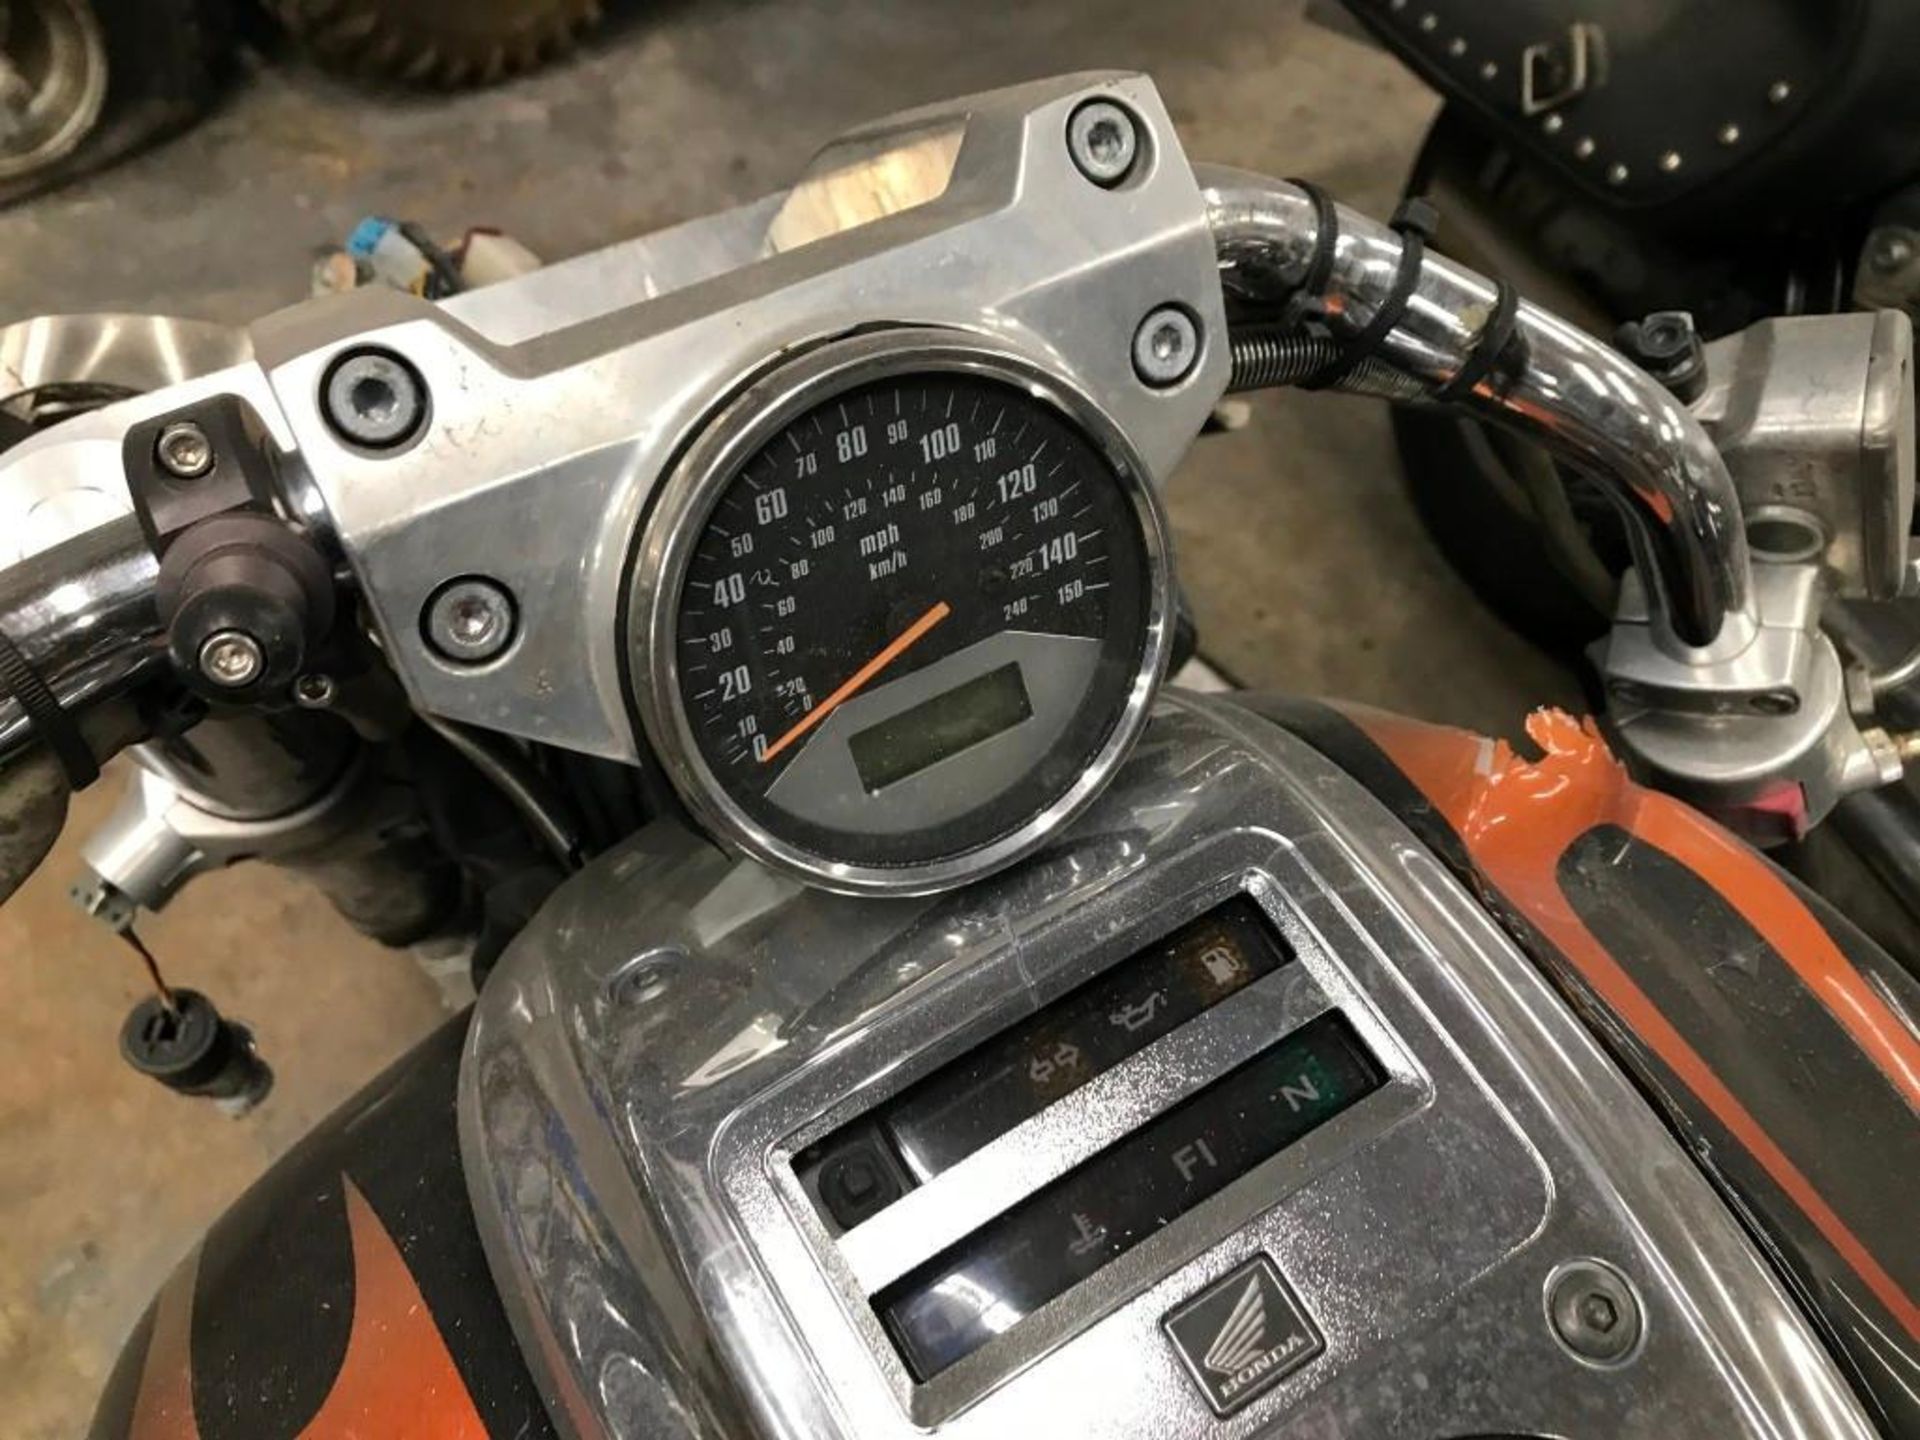 2006 HONDA VTX1800C2 MOTORCYCLE (PARTS ONLY) - Image 12 of 18